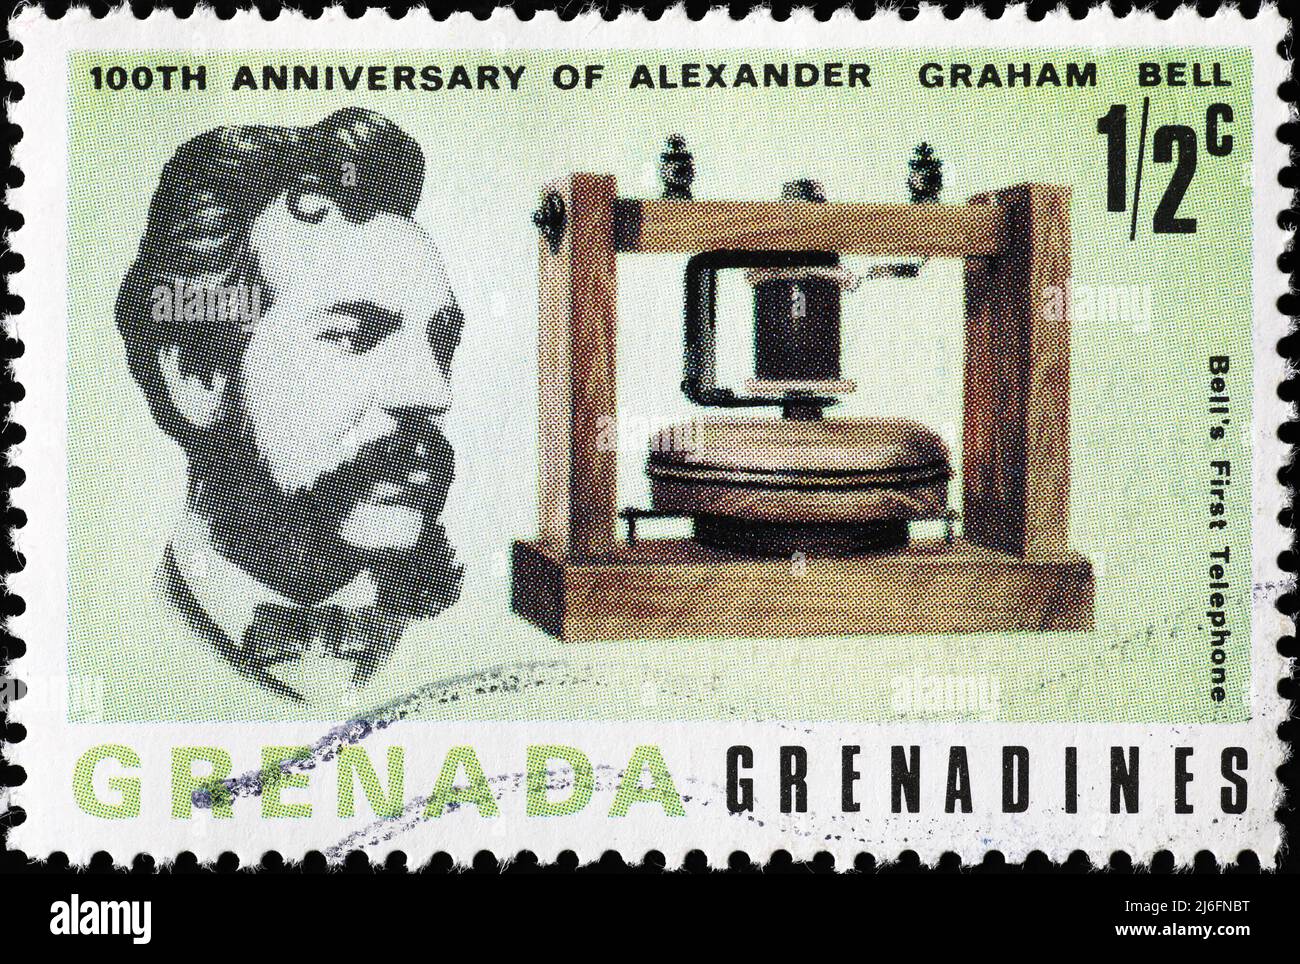 Anniversary of Alexander Graham Bell celebrated on postage stamp Stock Photo